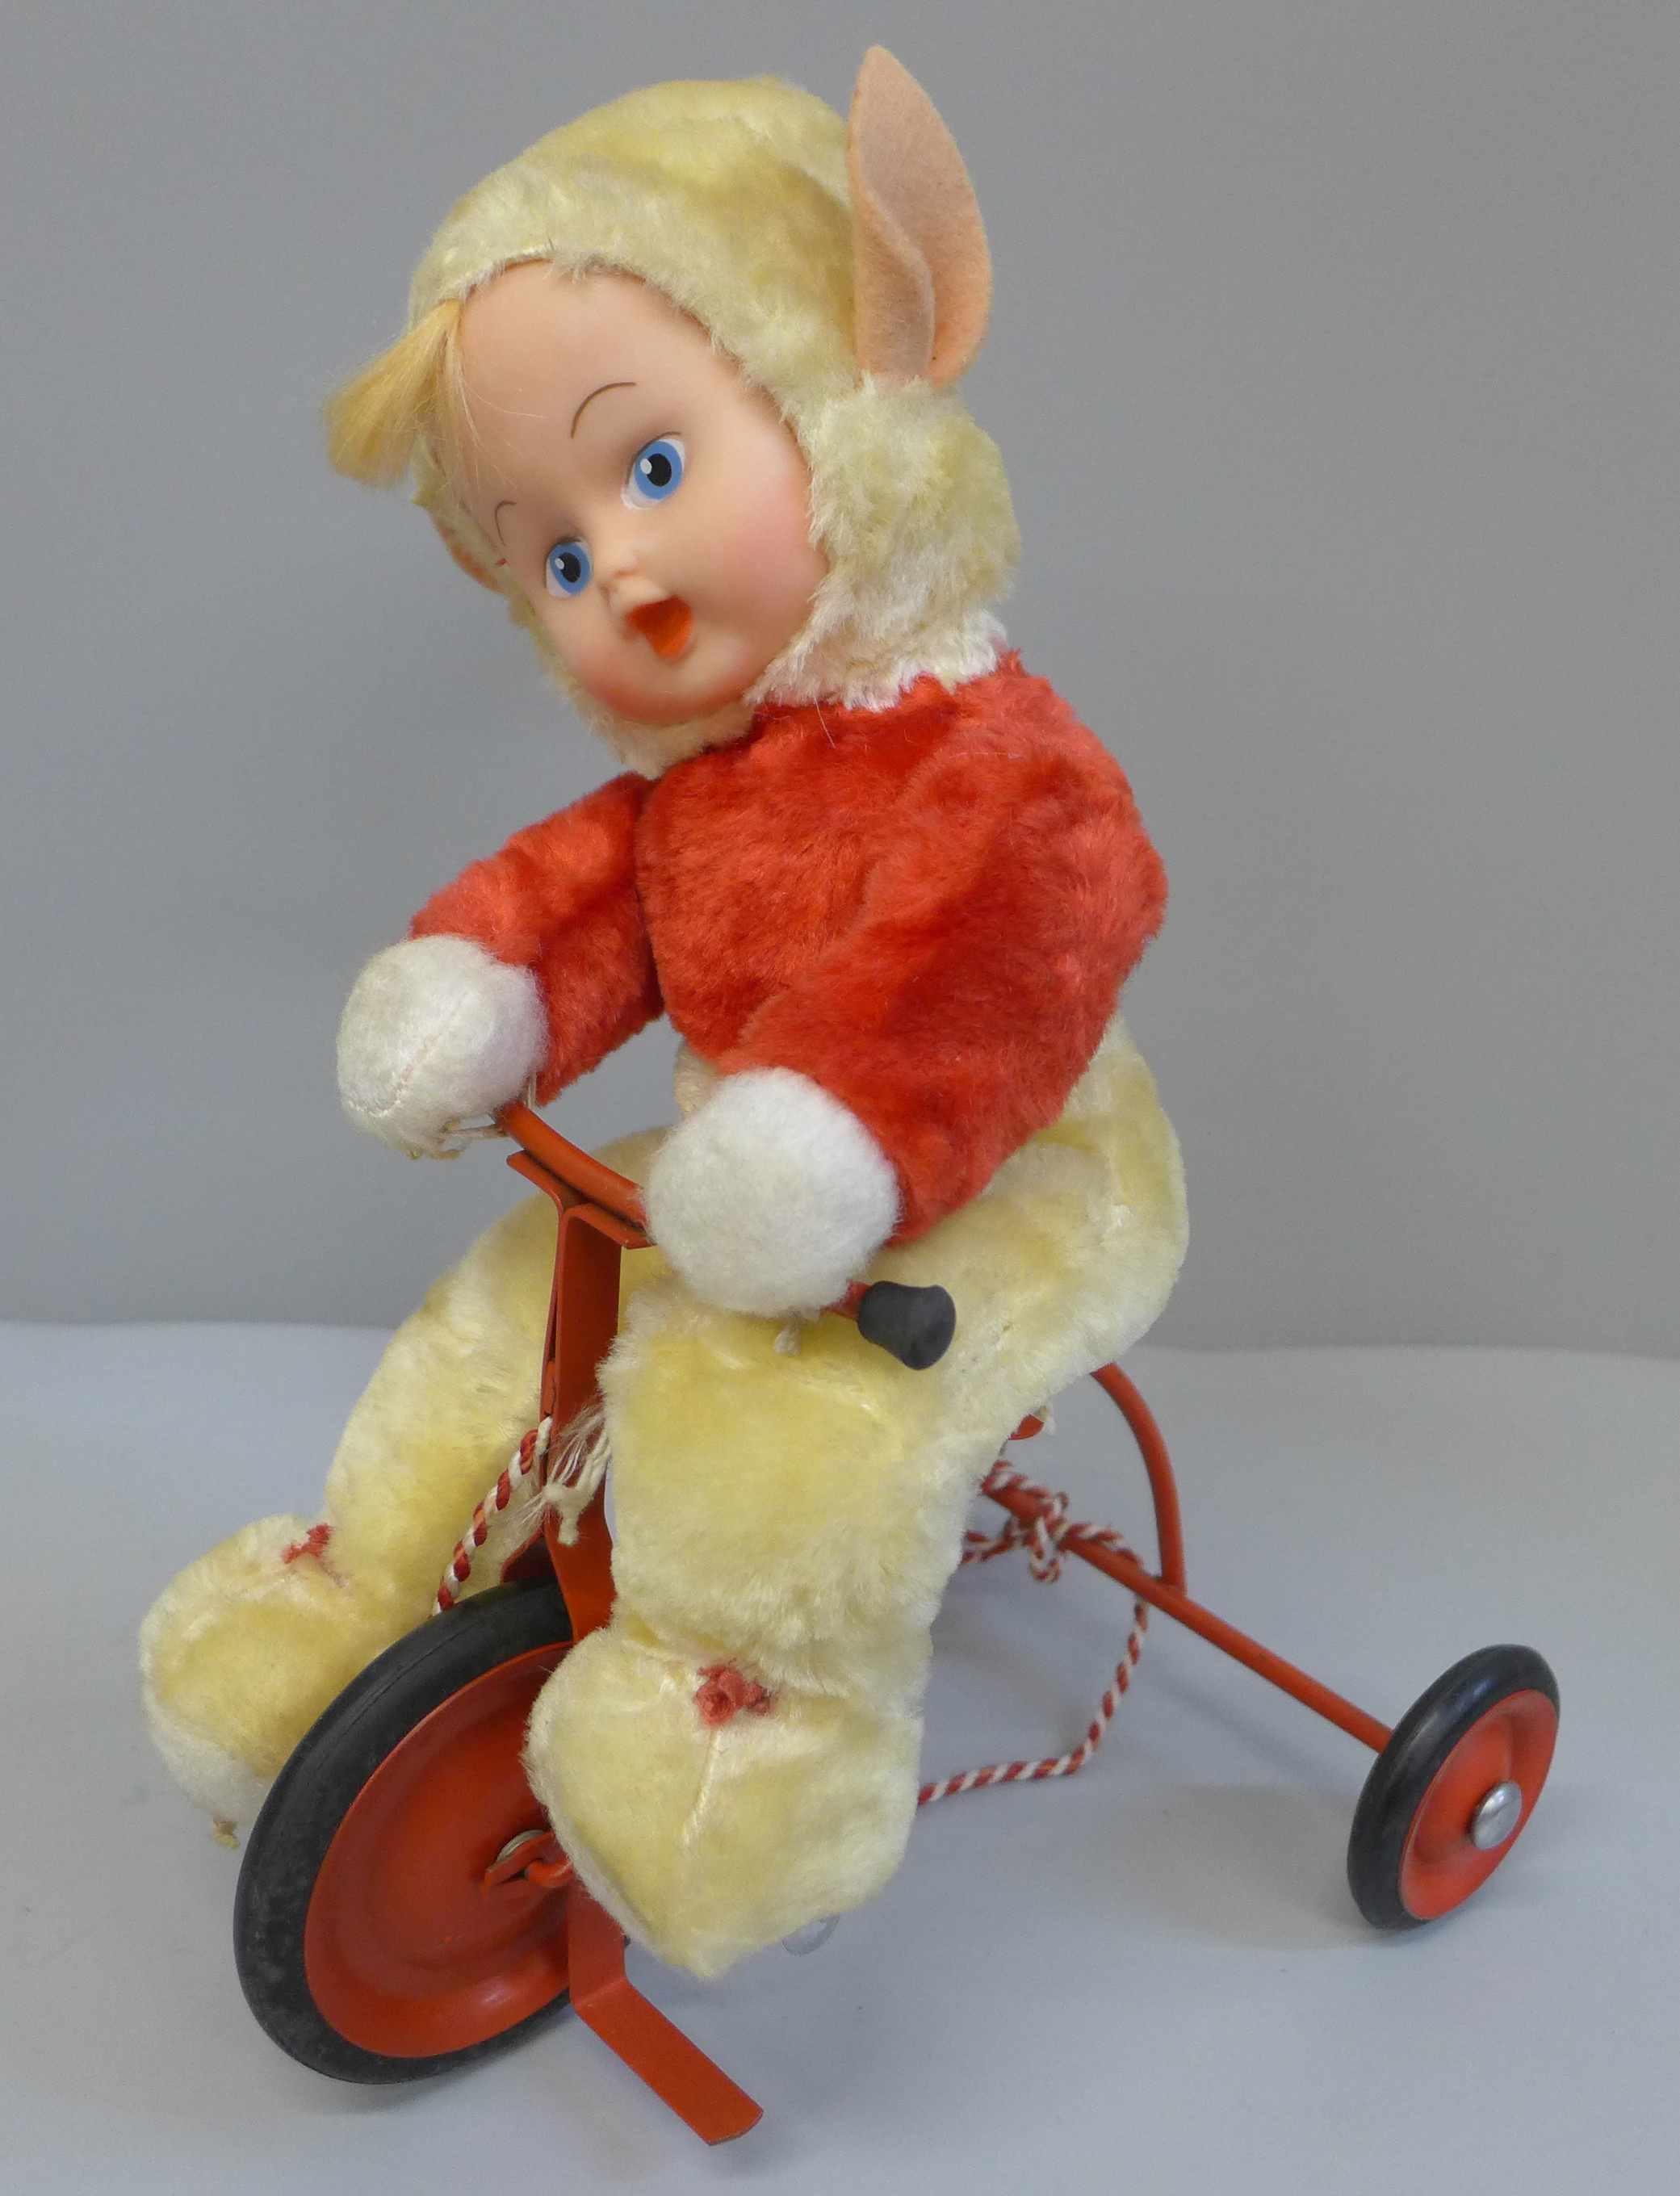 A vintage 1950's Chiltern Toys Pixie on a Trike doll, boxed